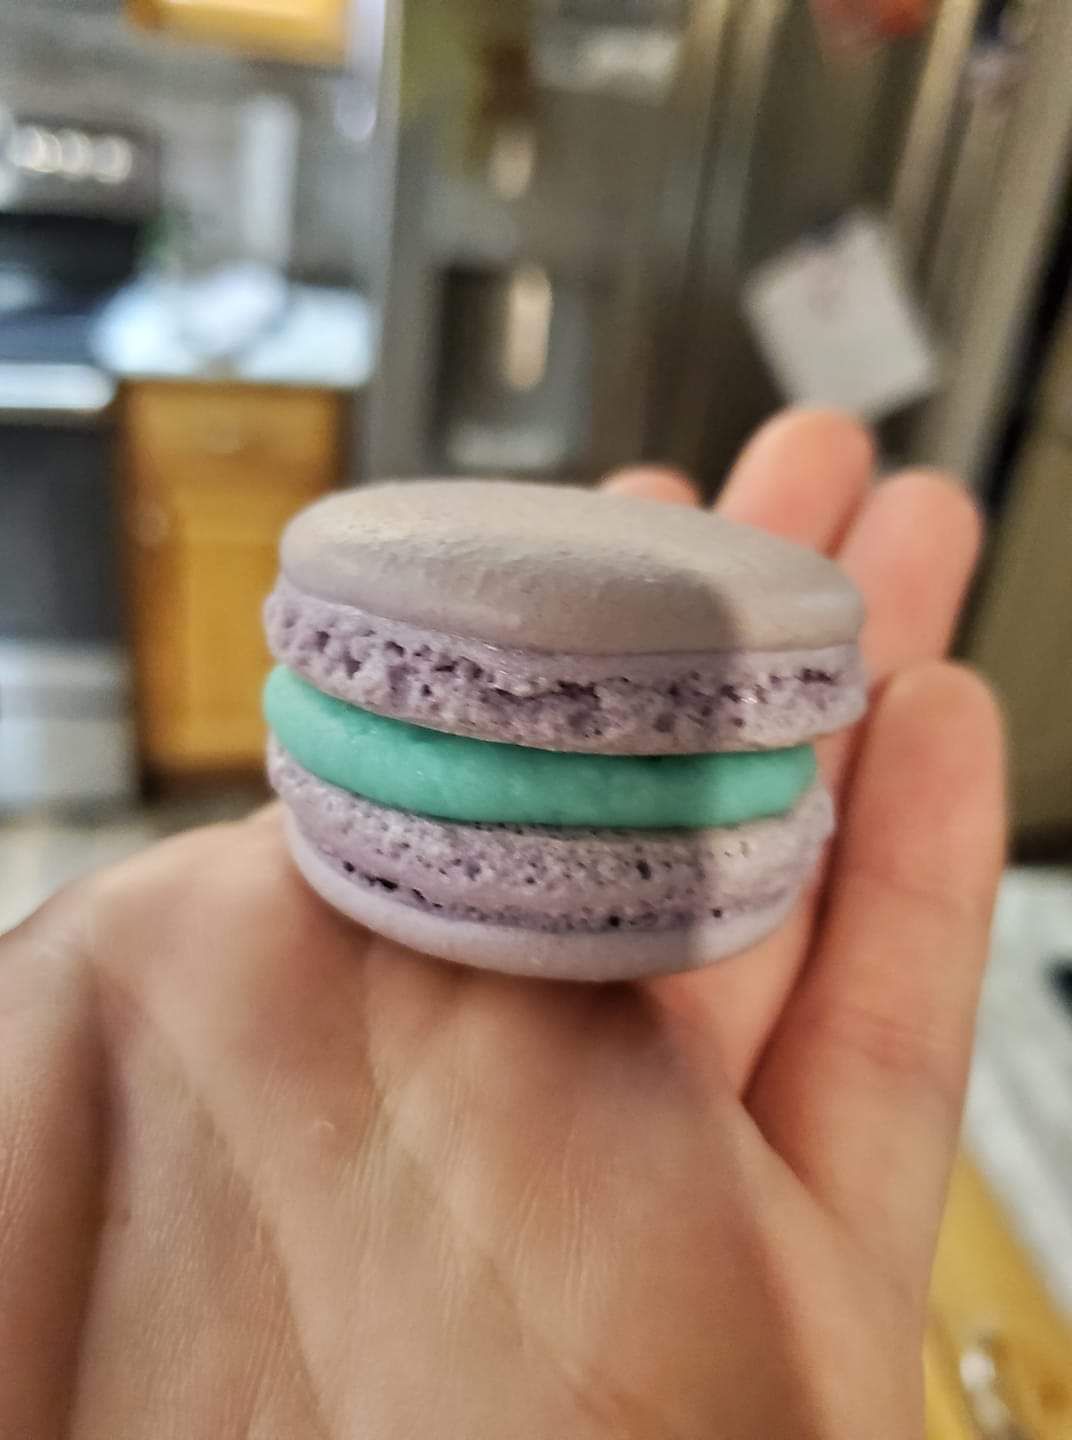 3rd attempt finally came out right, first 2 were pancakes. Also first time having a macaron.